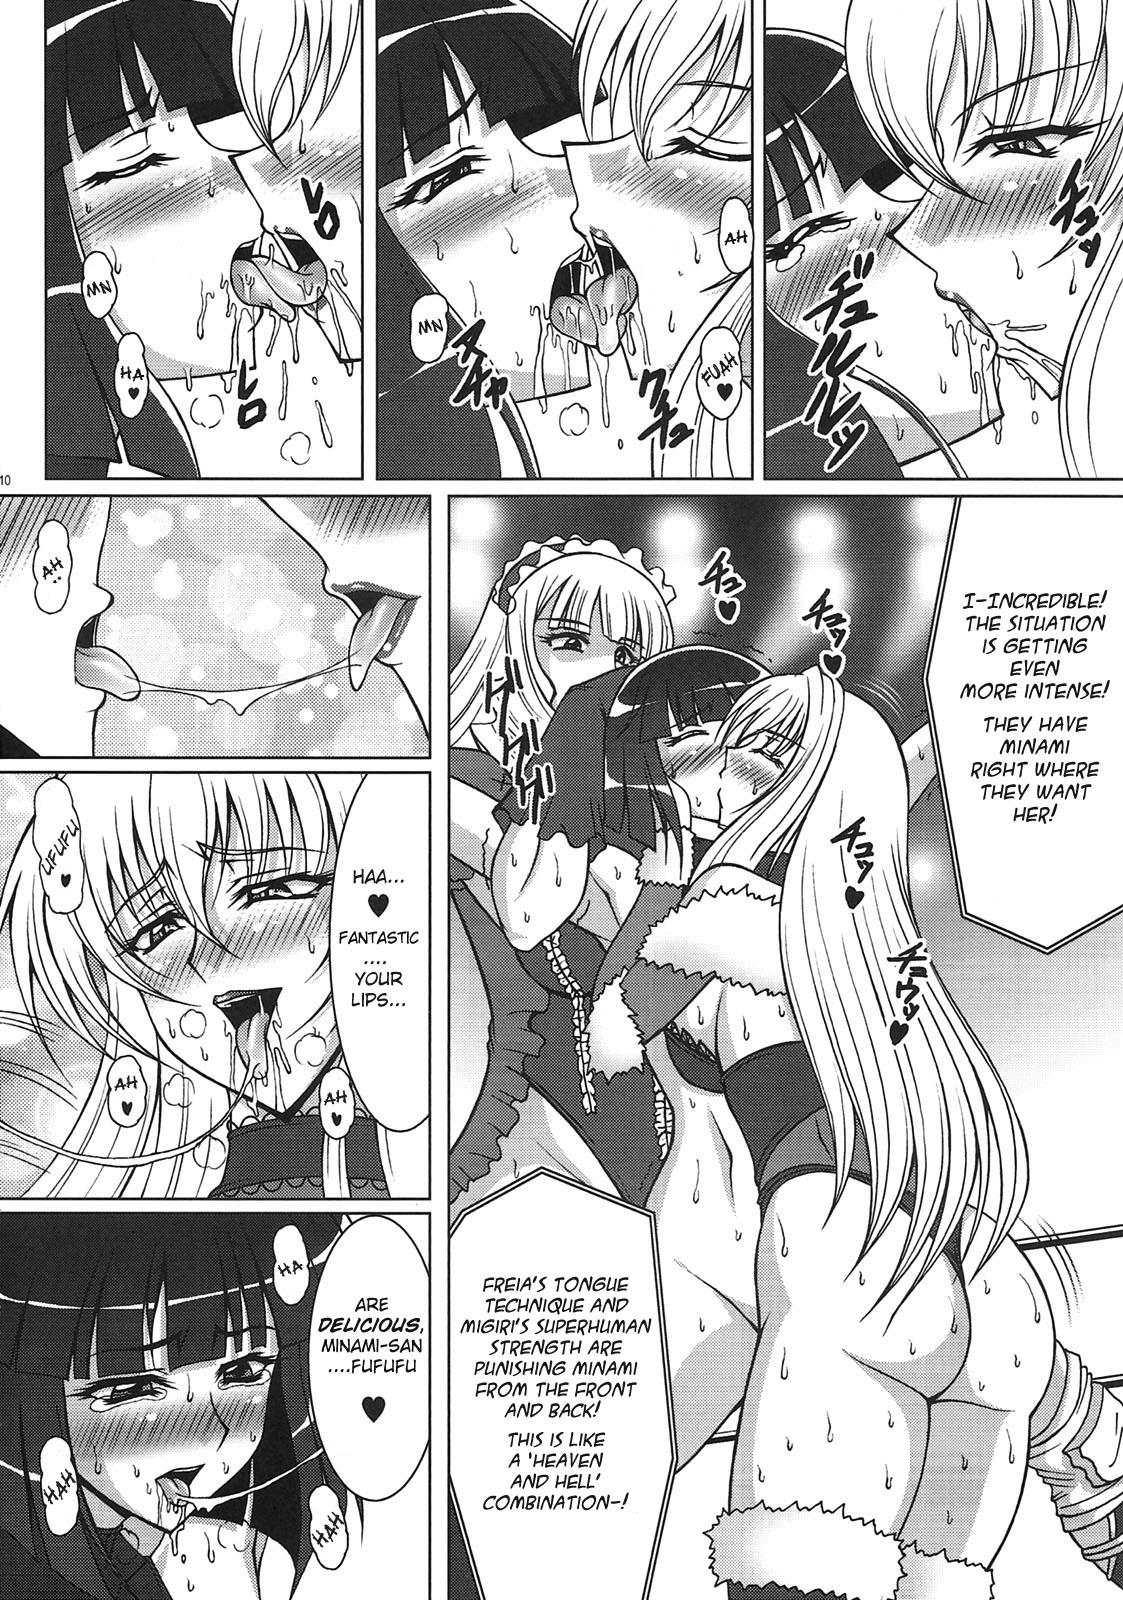 Abuse THE WRESTLE M@STER - Wrestle angels Sofa - Page 9